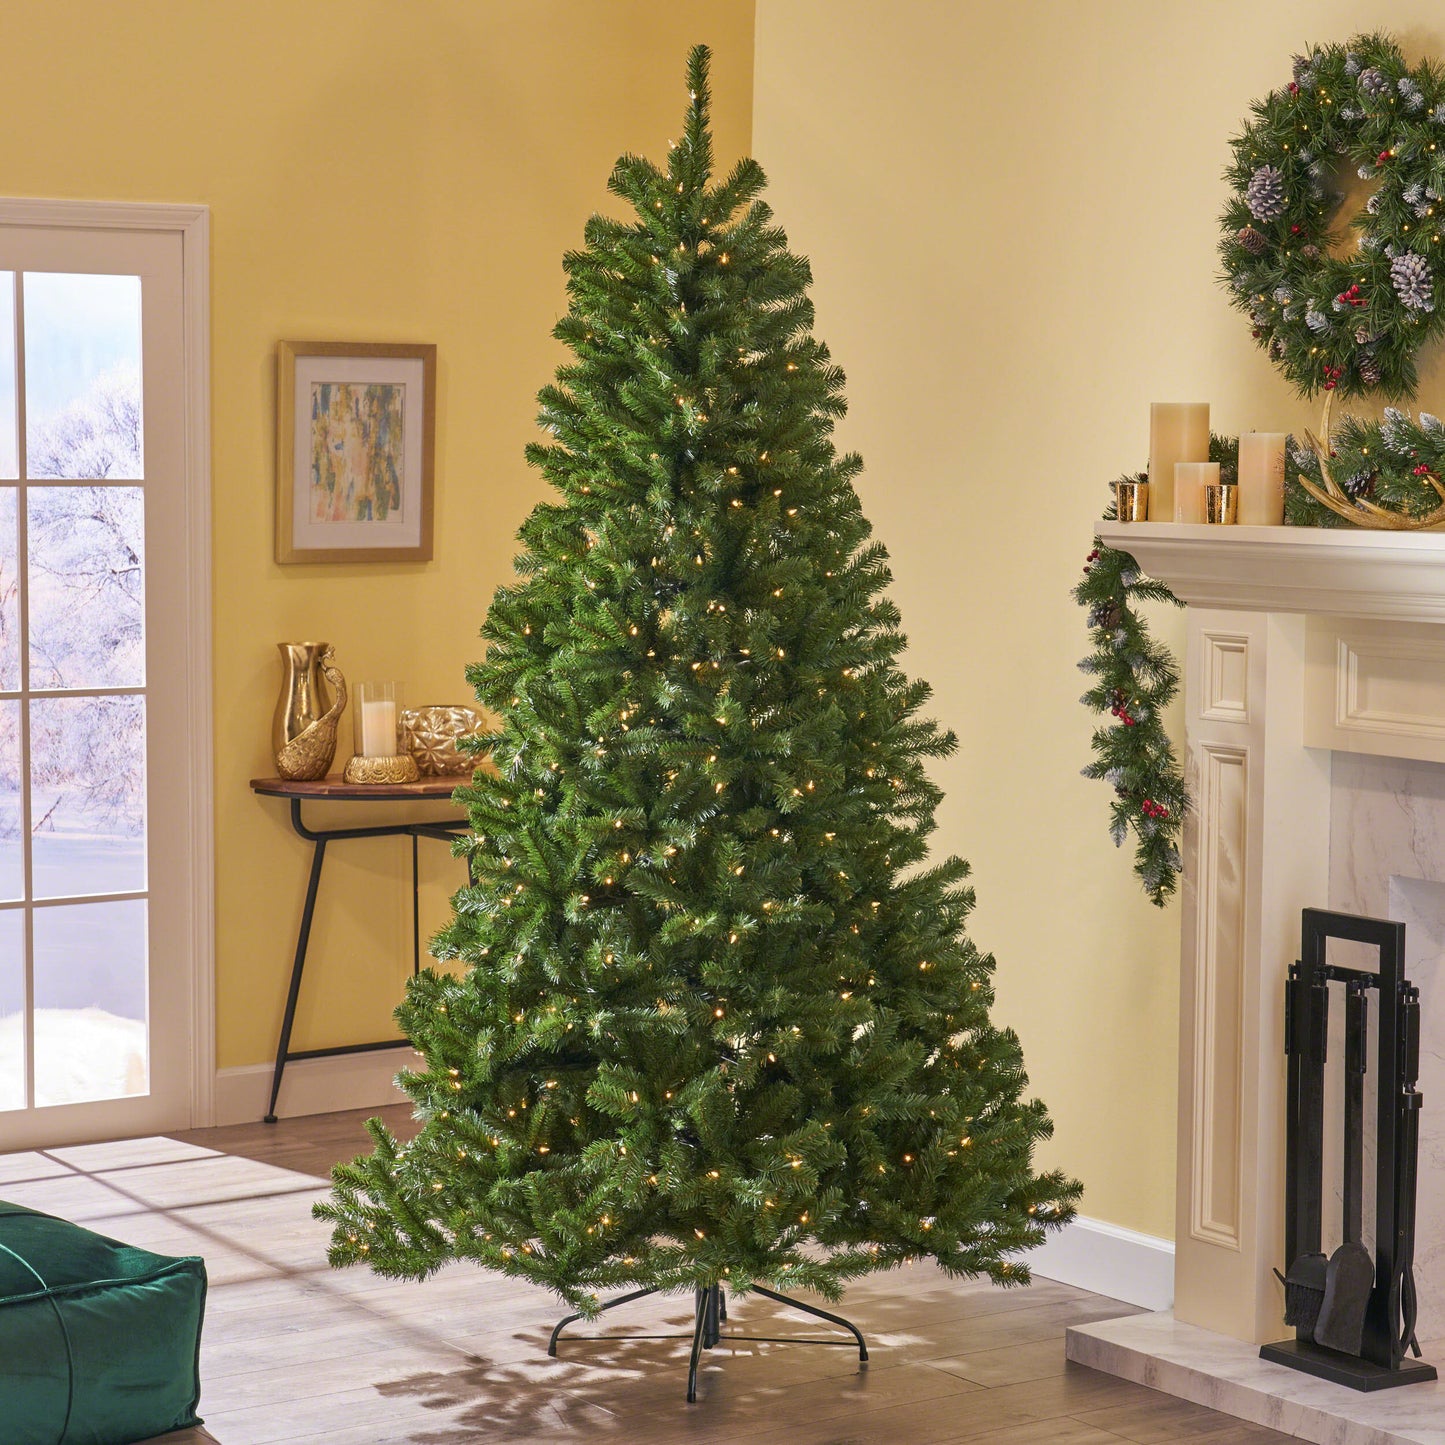 7.5-foot Noble Fir Hinged Artificial Christmas Tree